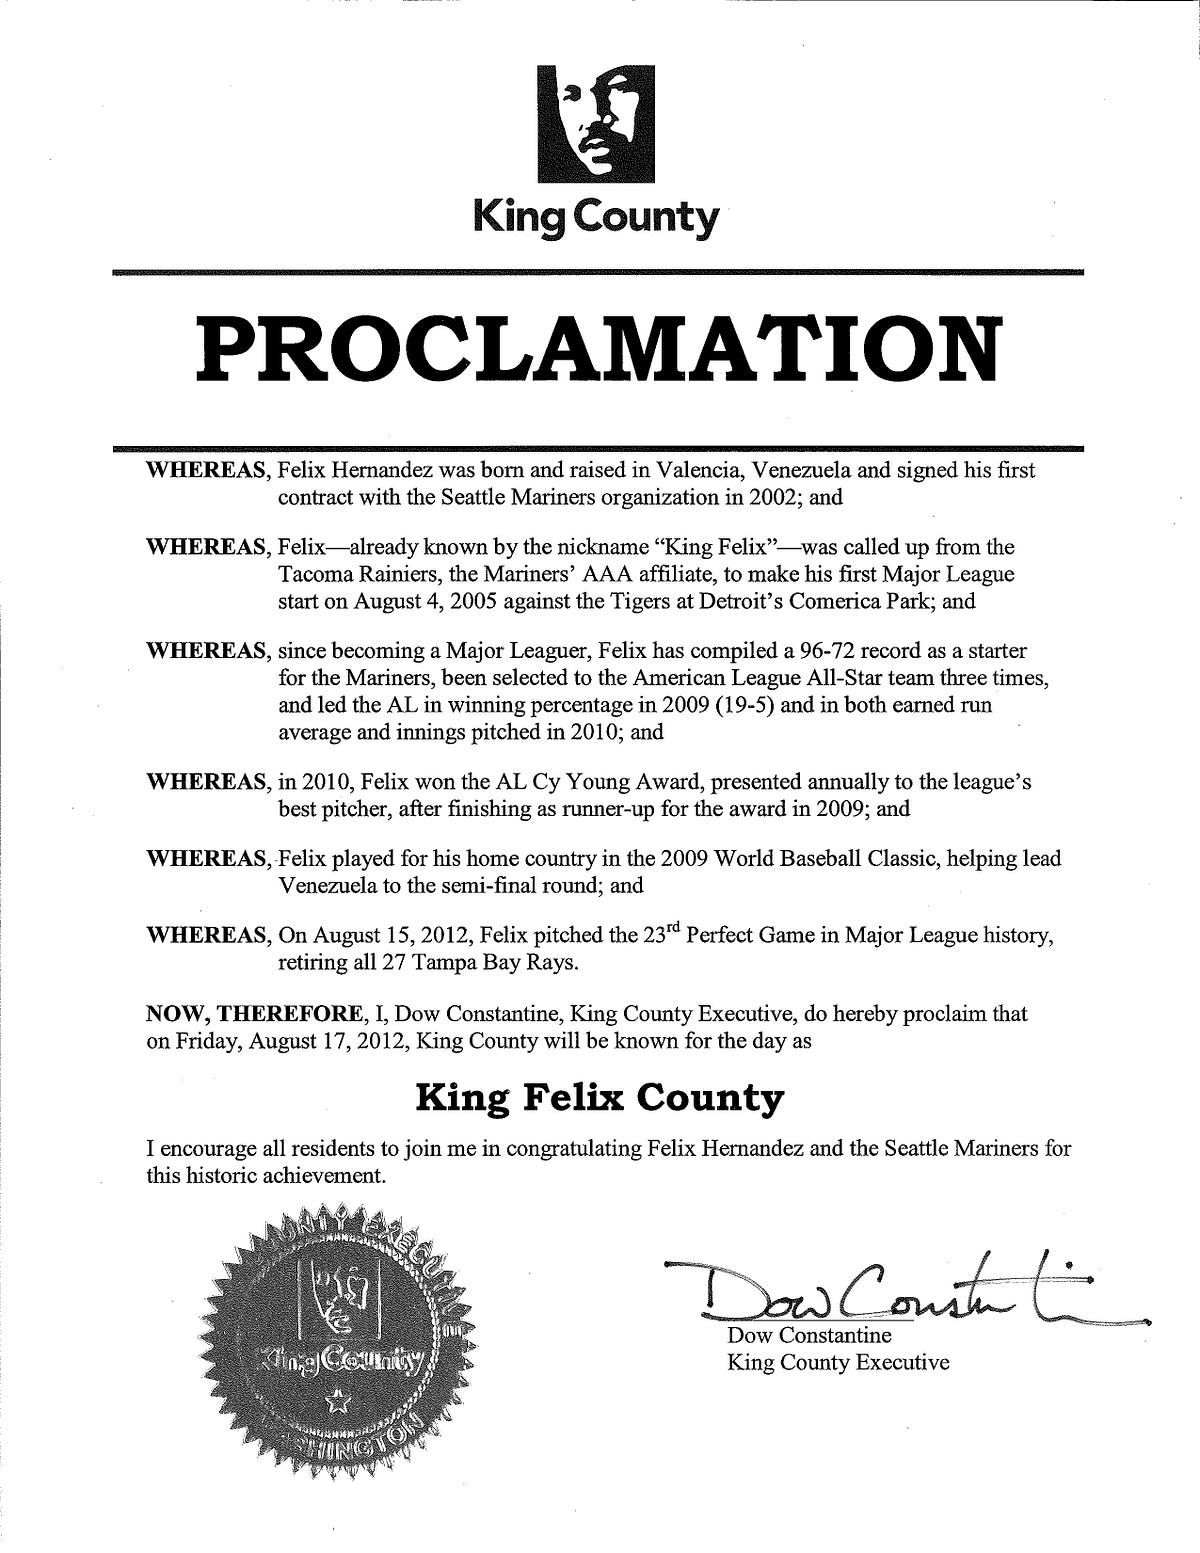 Welcome to King Felix County, by Mariners PR